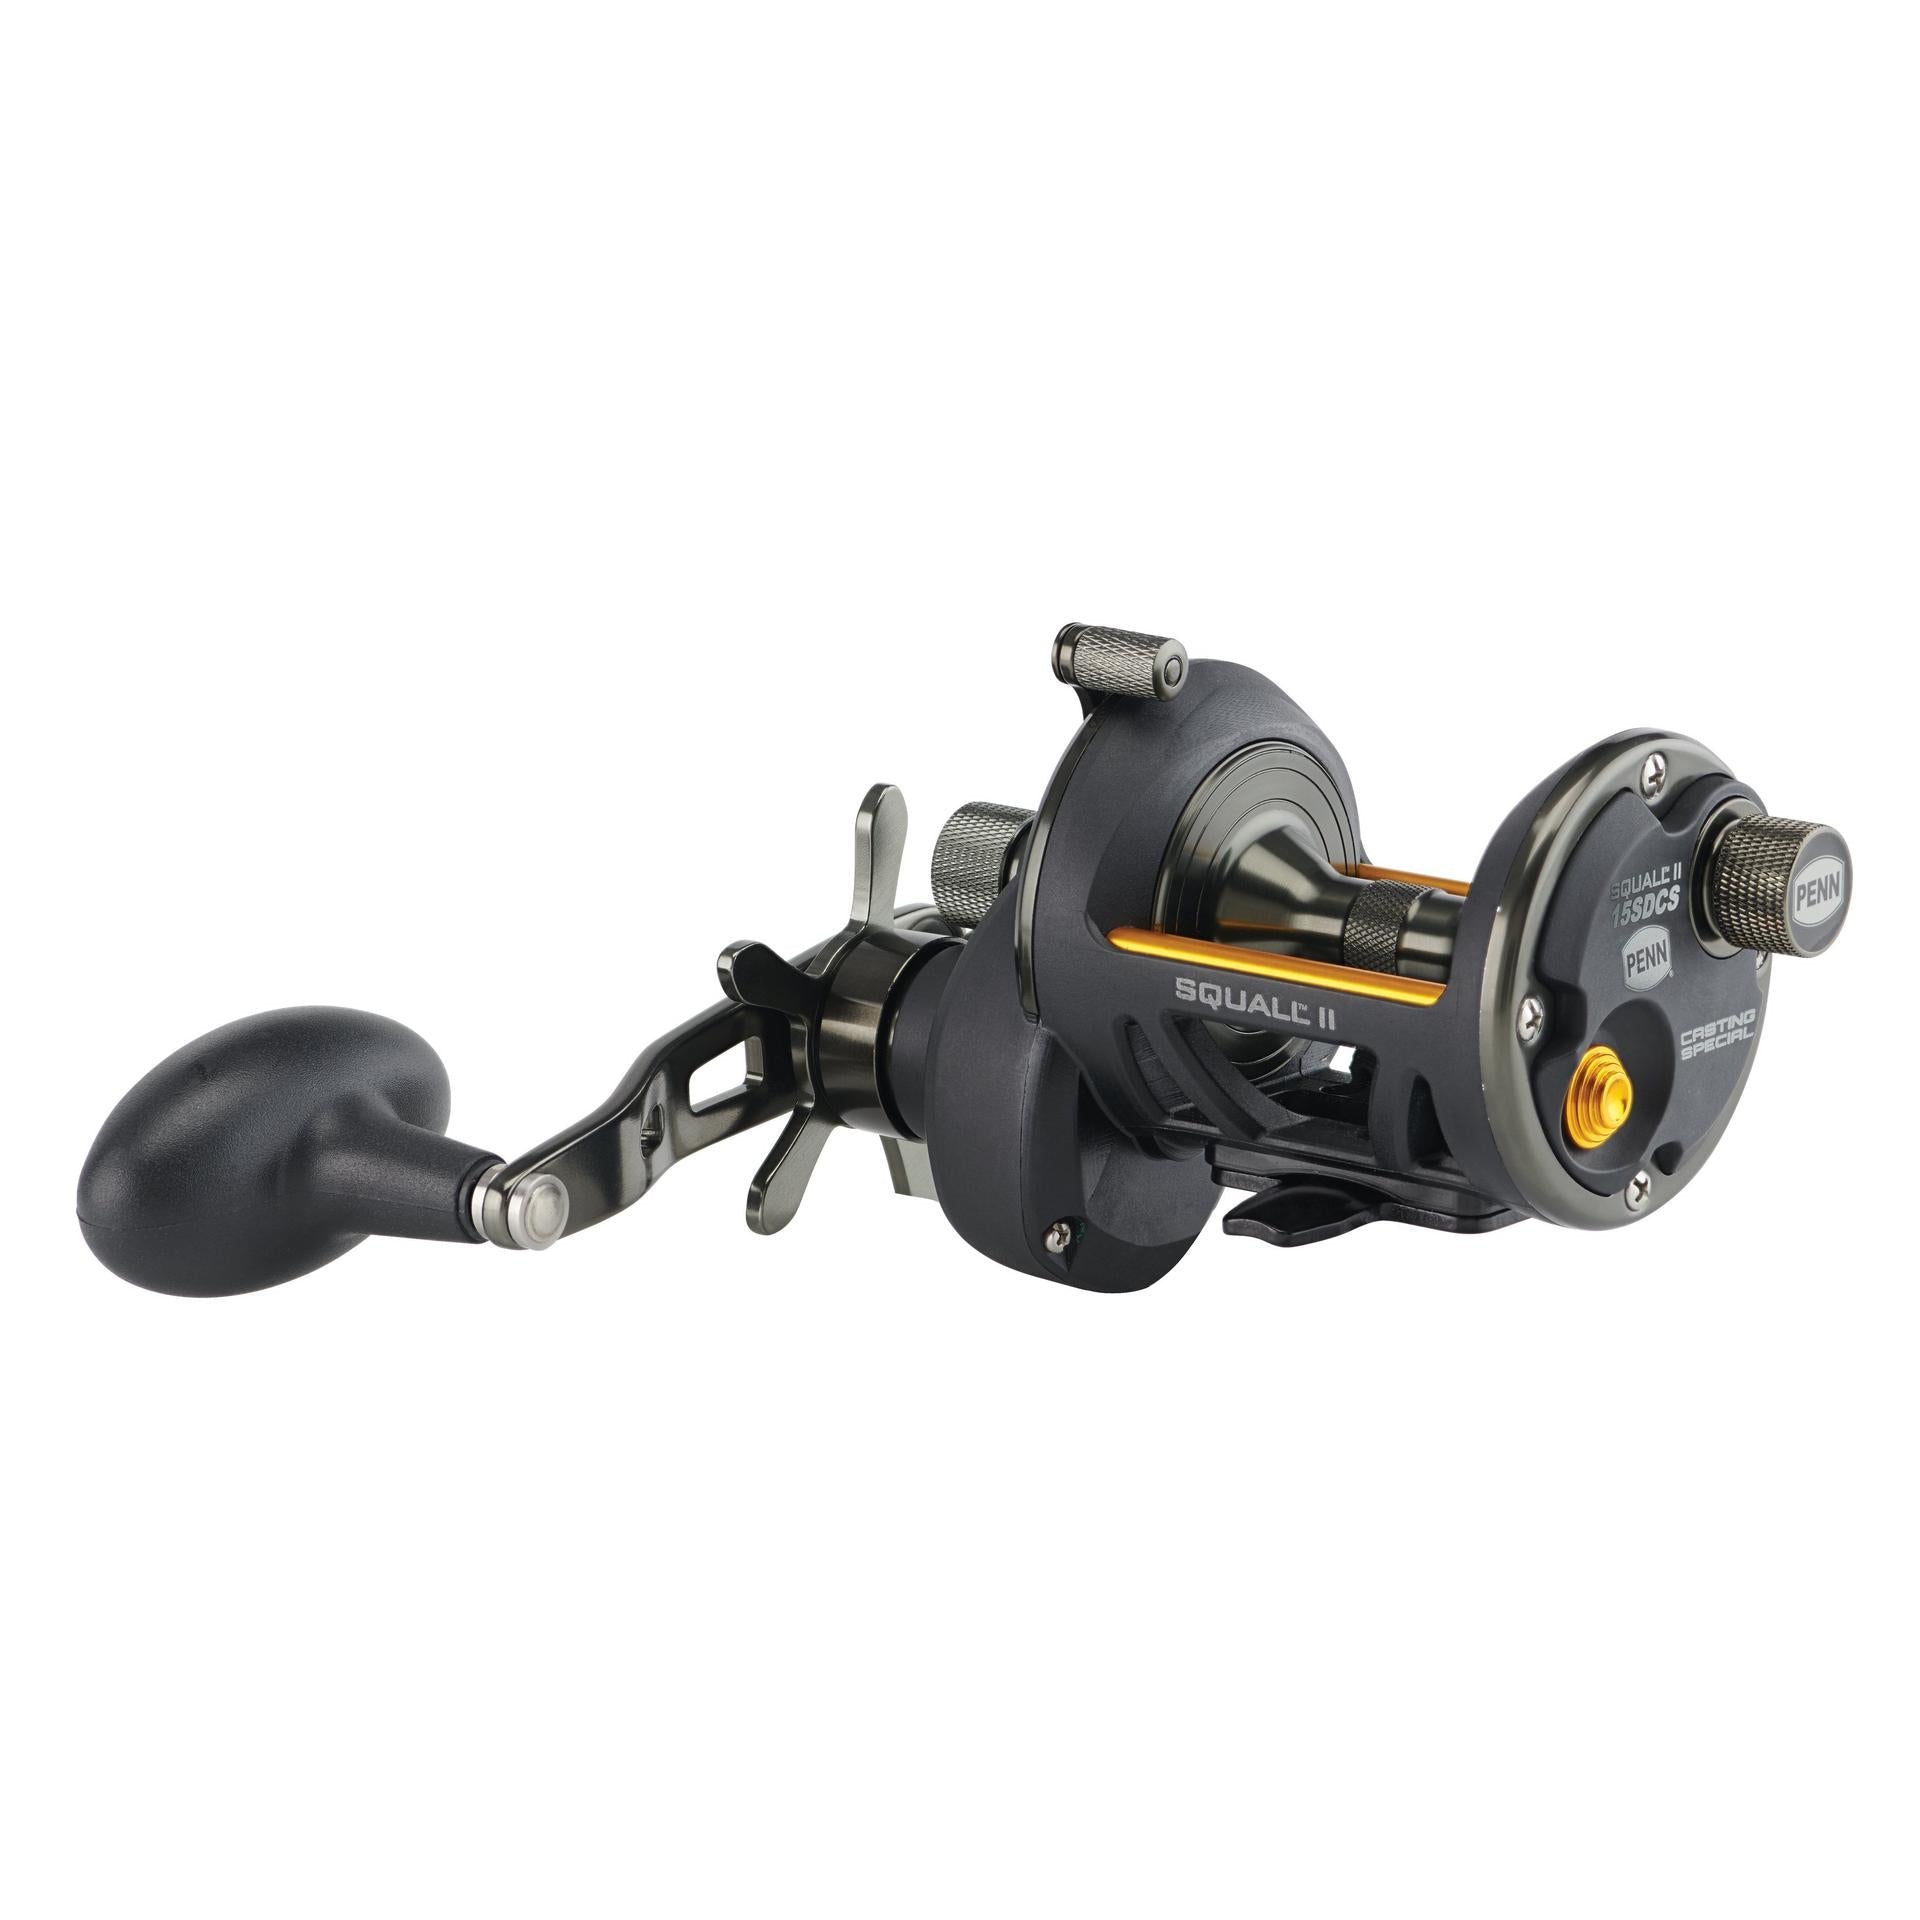 Squall® II Star Drag Casting Special Conventional Reel